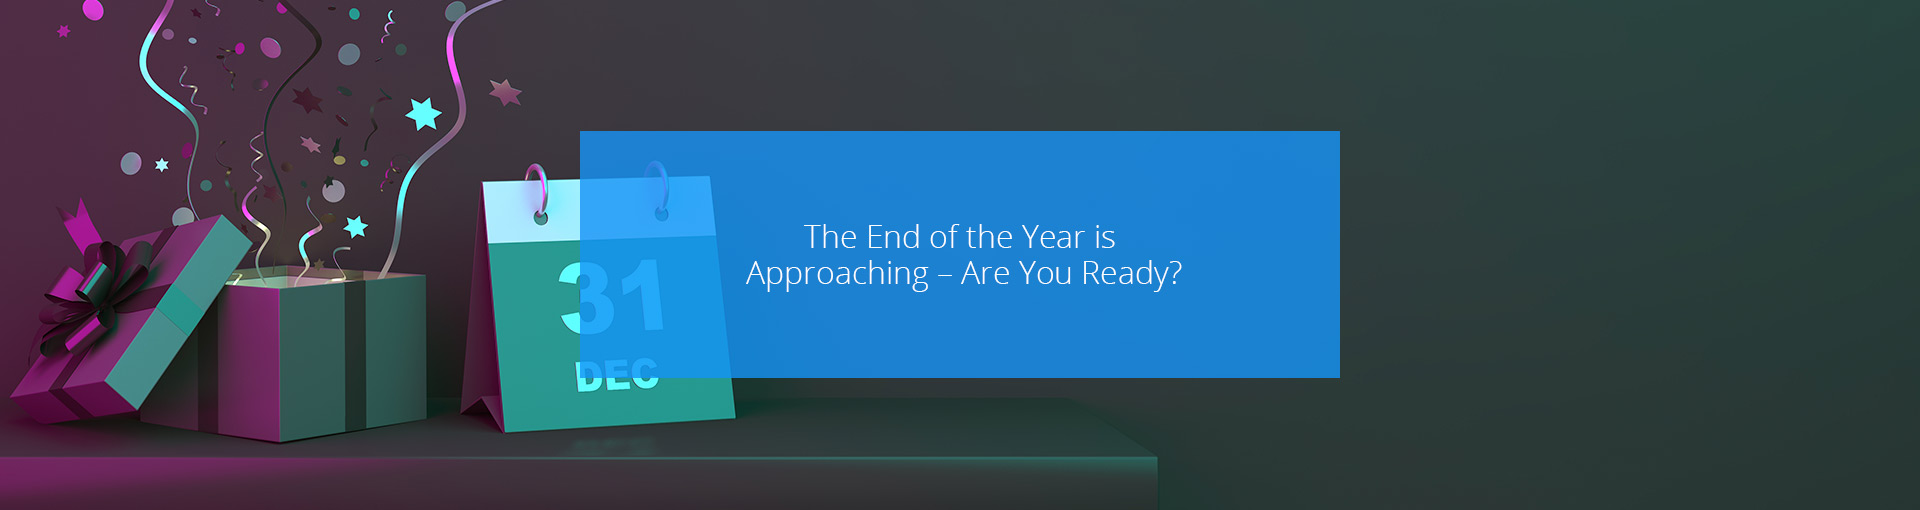 The End of the Year is Approaching – Are You Ready? Featured Image